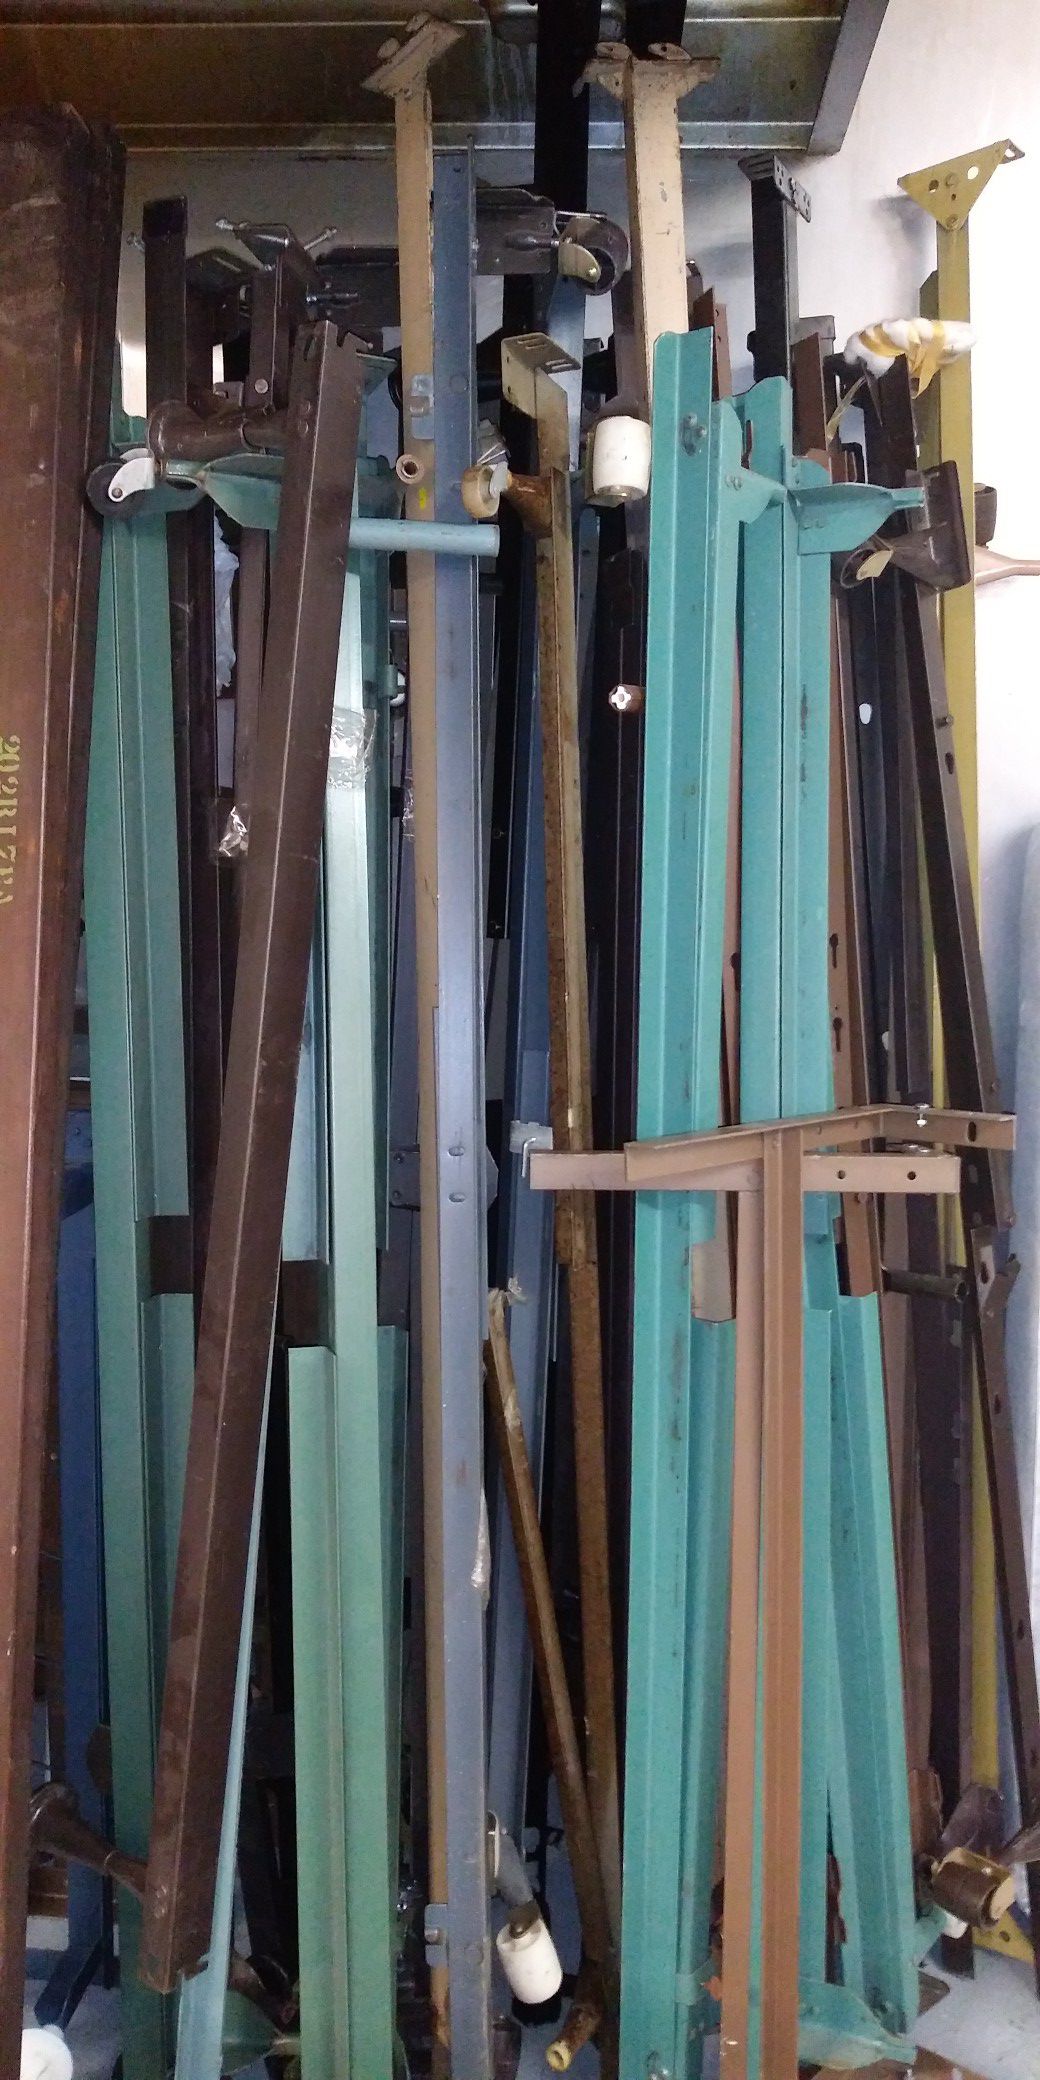 Metal bed frames for sale at St Louis Consignment Gallery